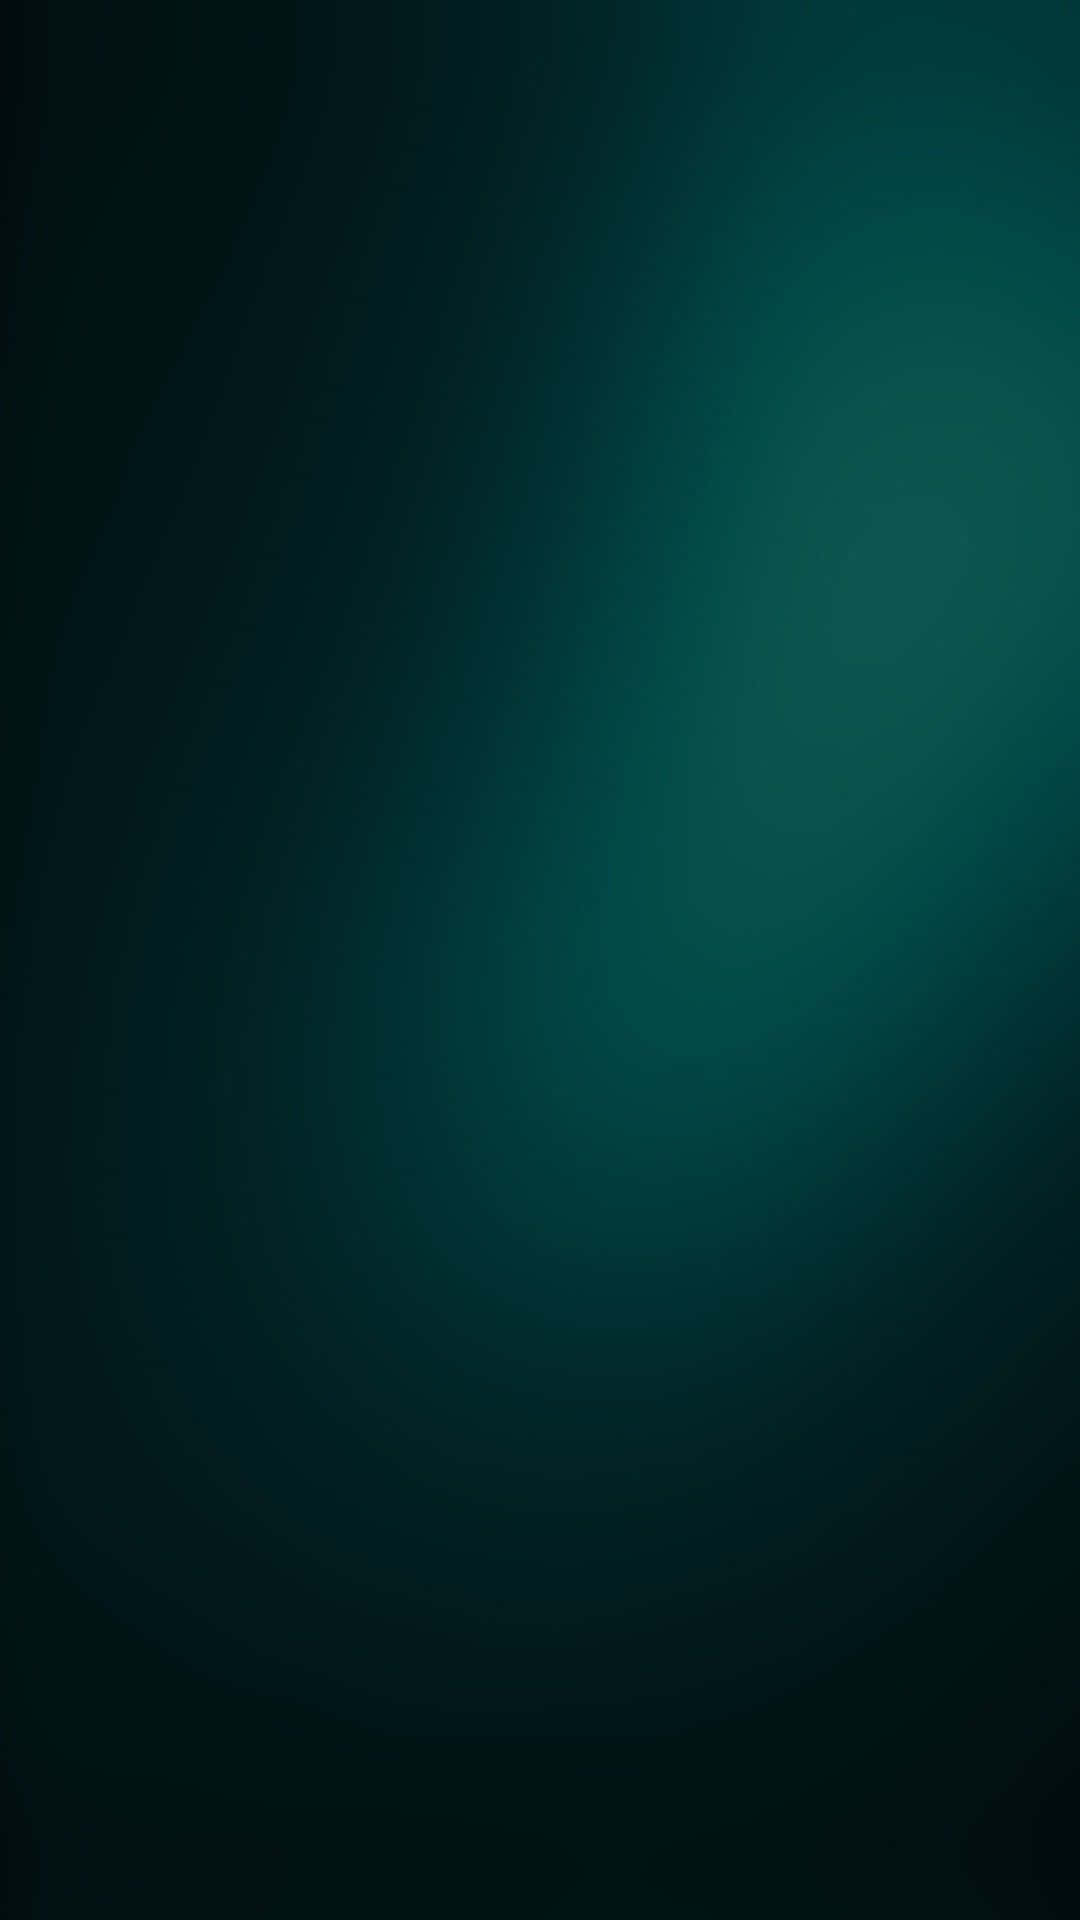 A Crisp and Clean Black and Teal Fusion Wallpaper